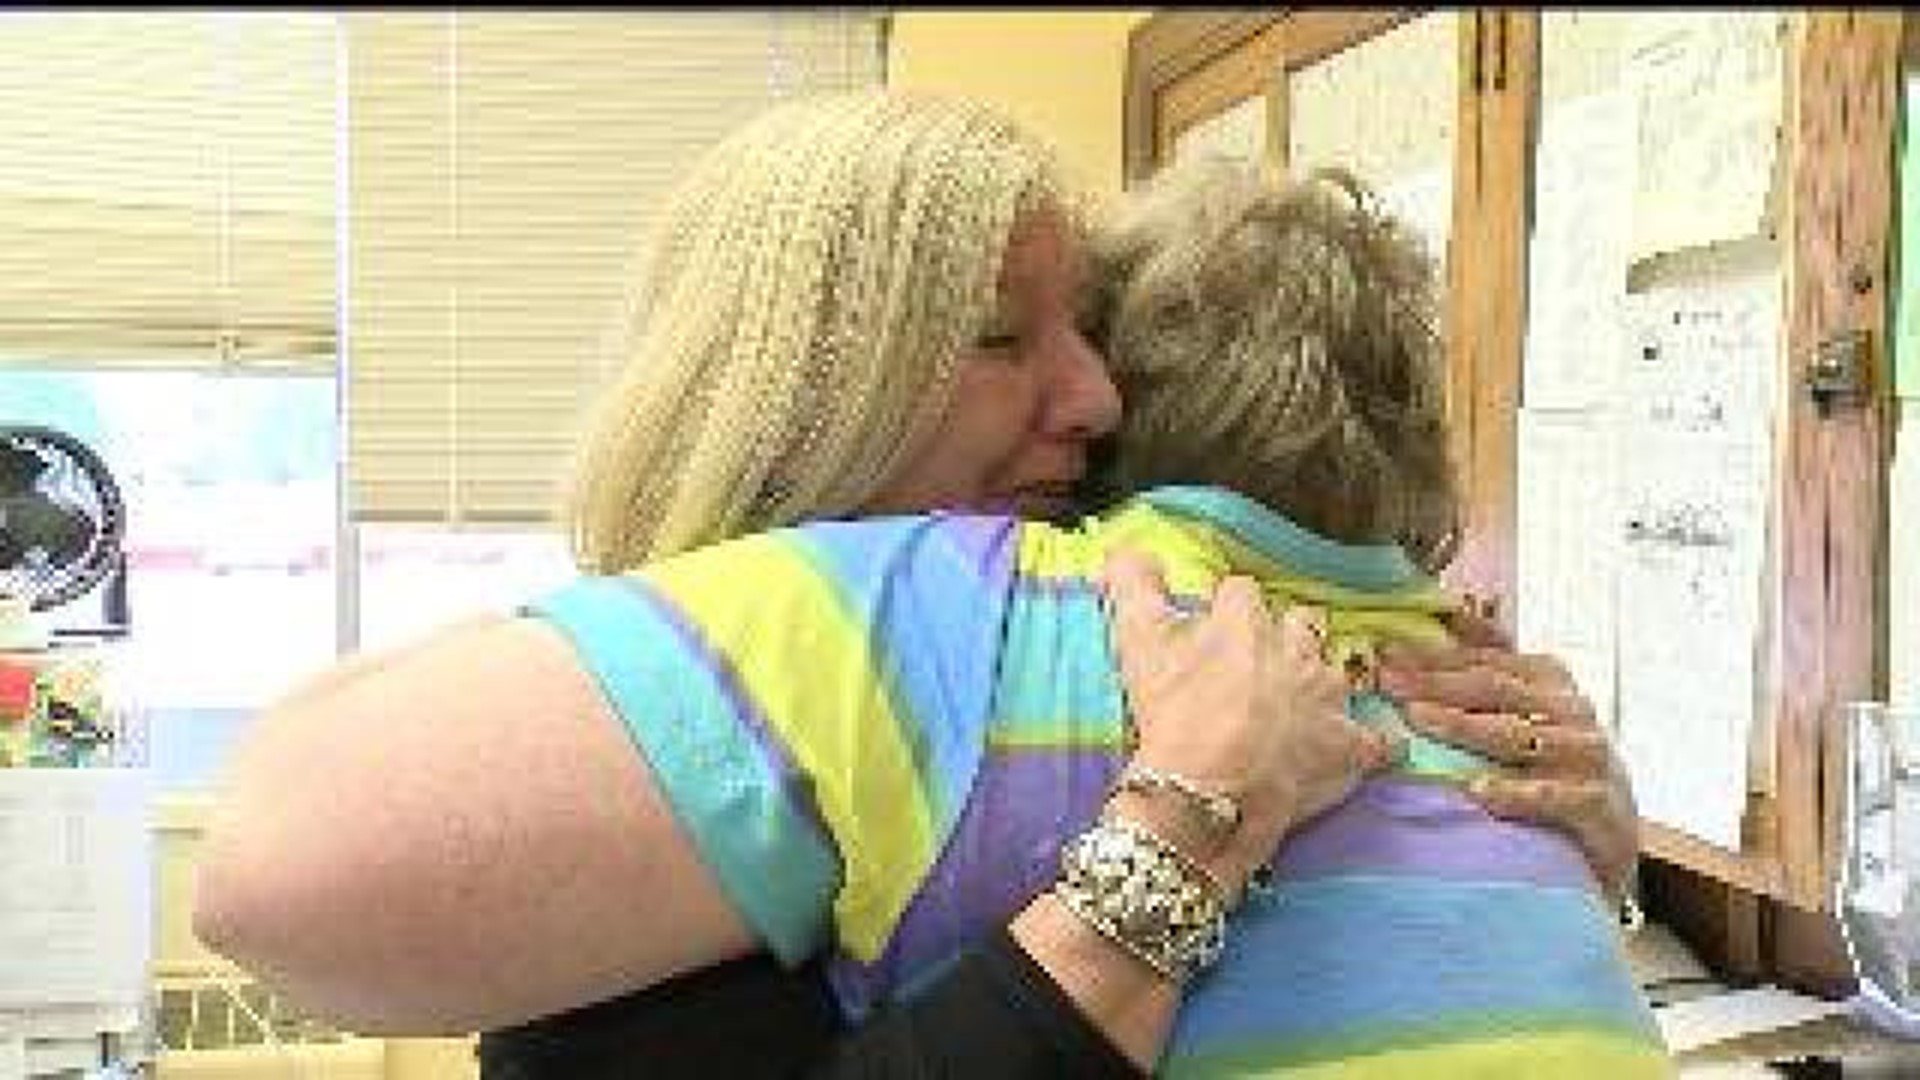 Benefit held for Pay it Forward recipient